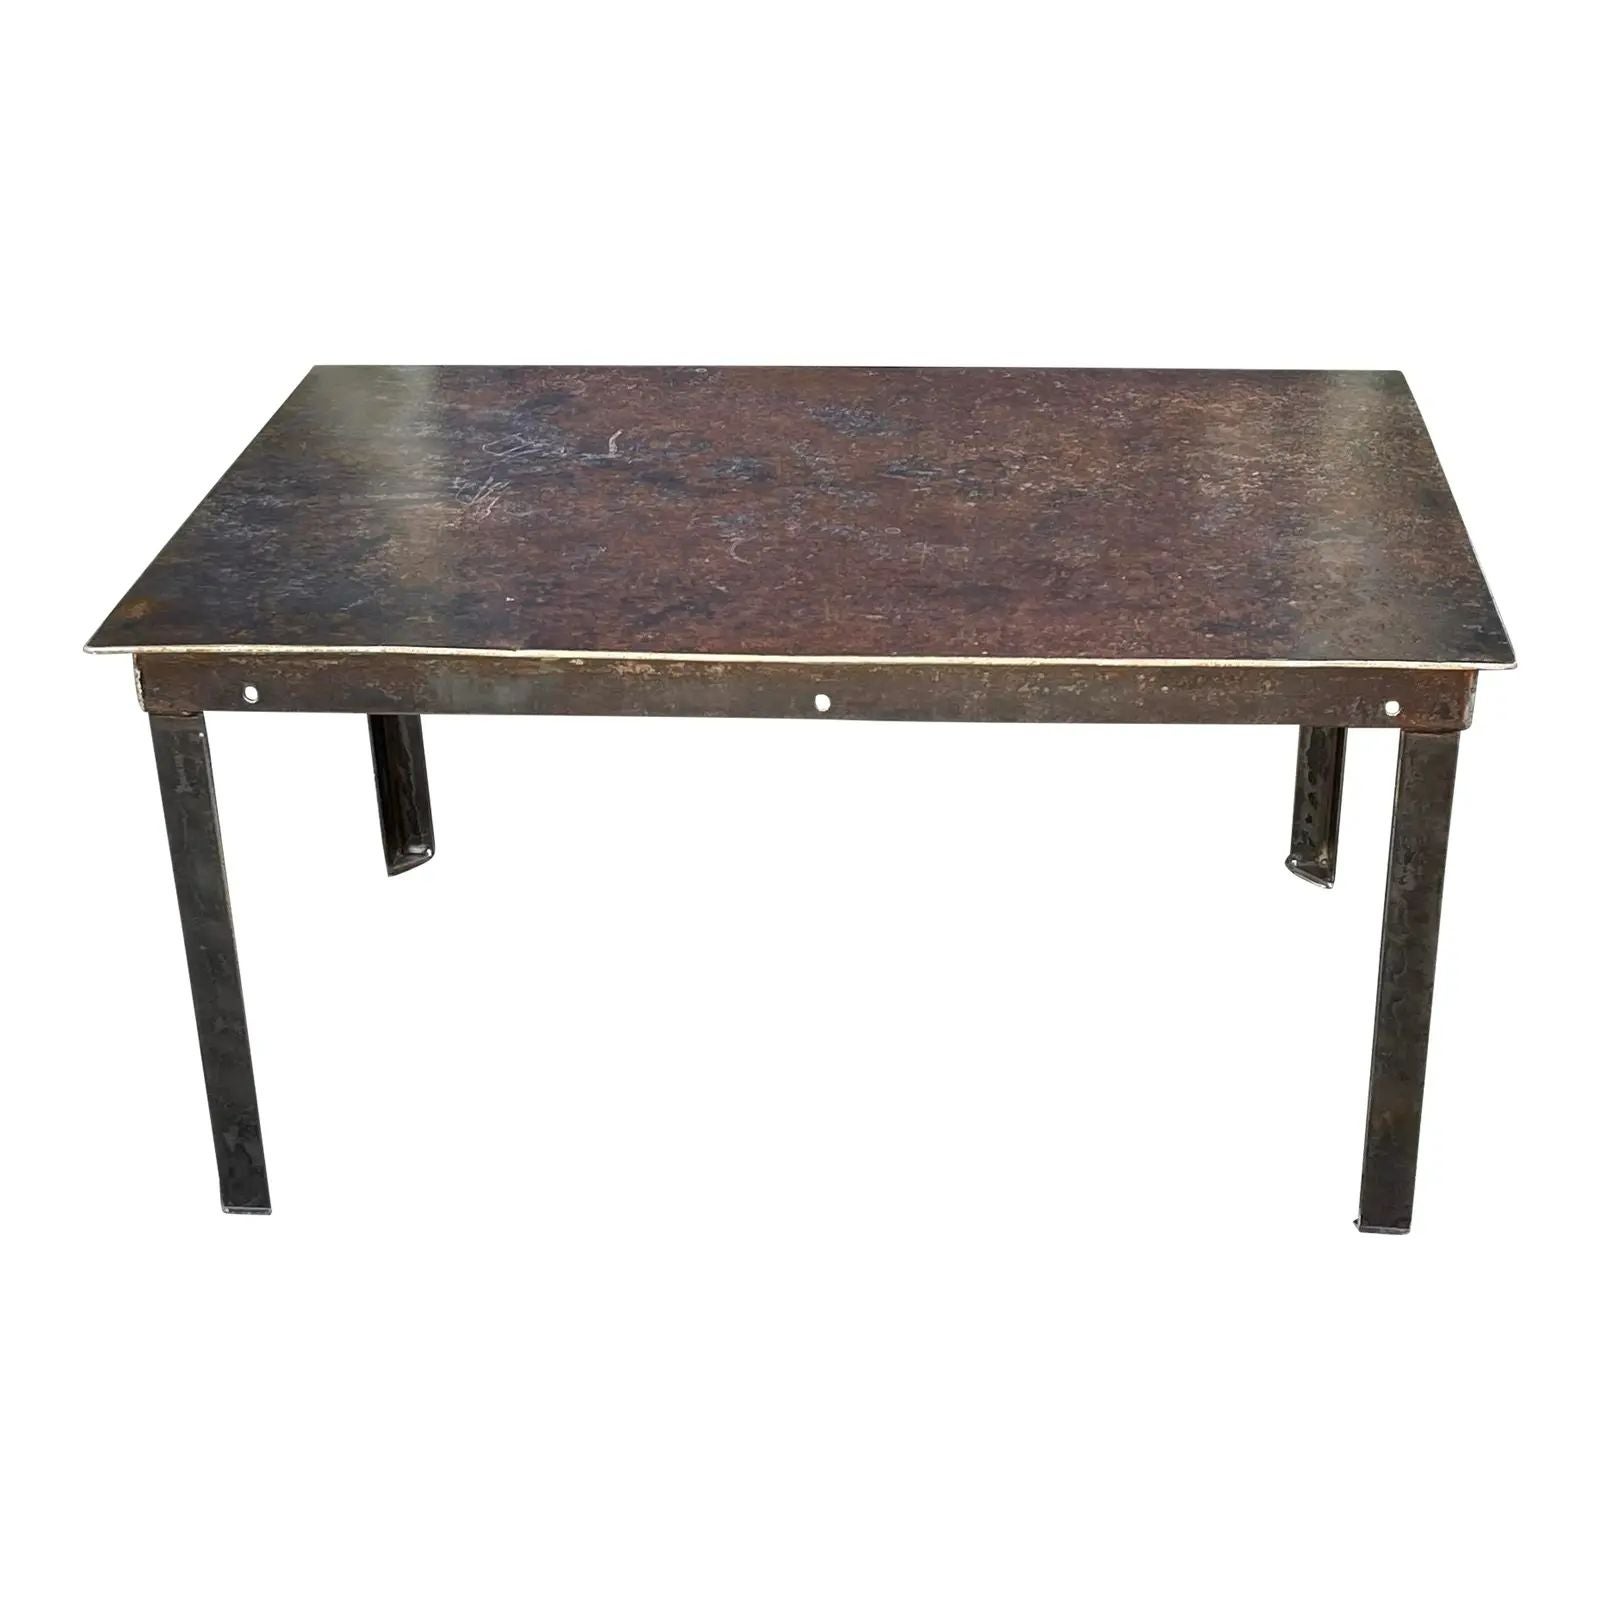 Modern Pounded Iron Industrial Chic Coffee Cocktail Table For Sale